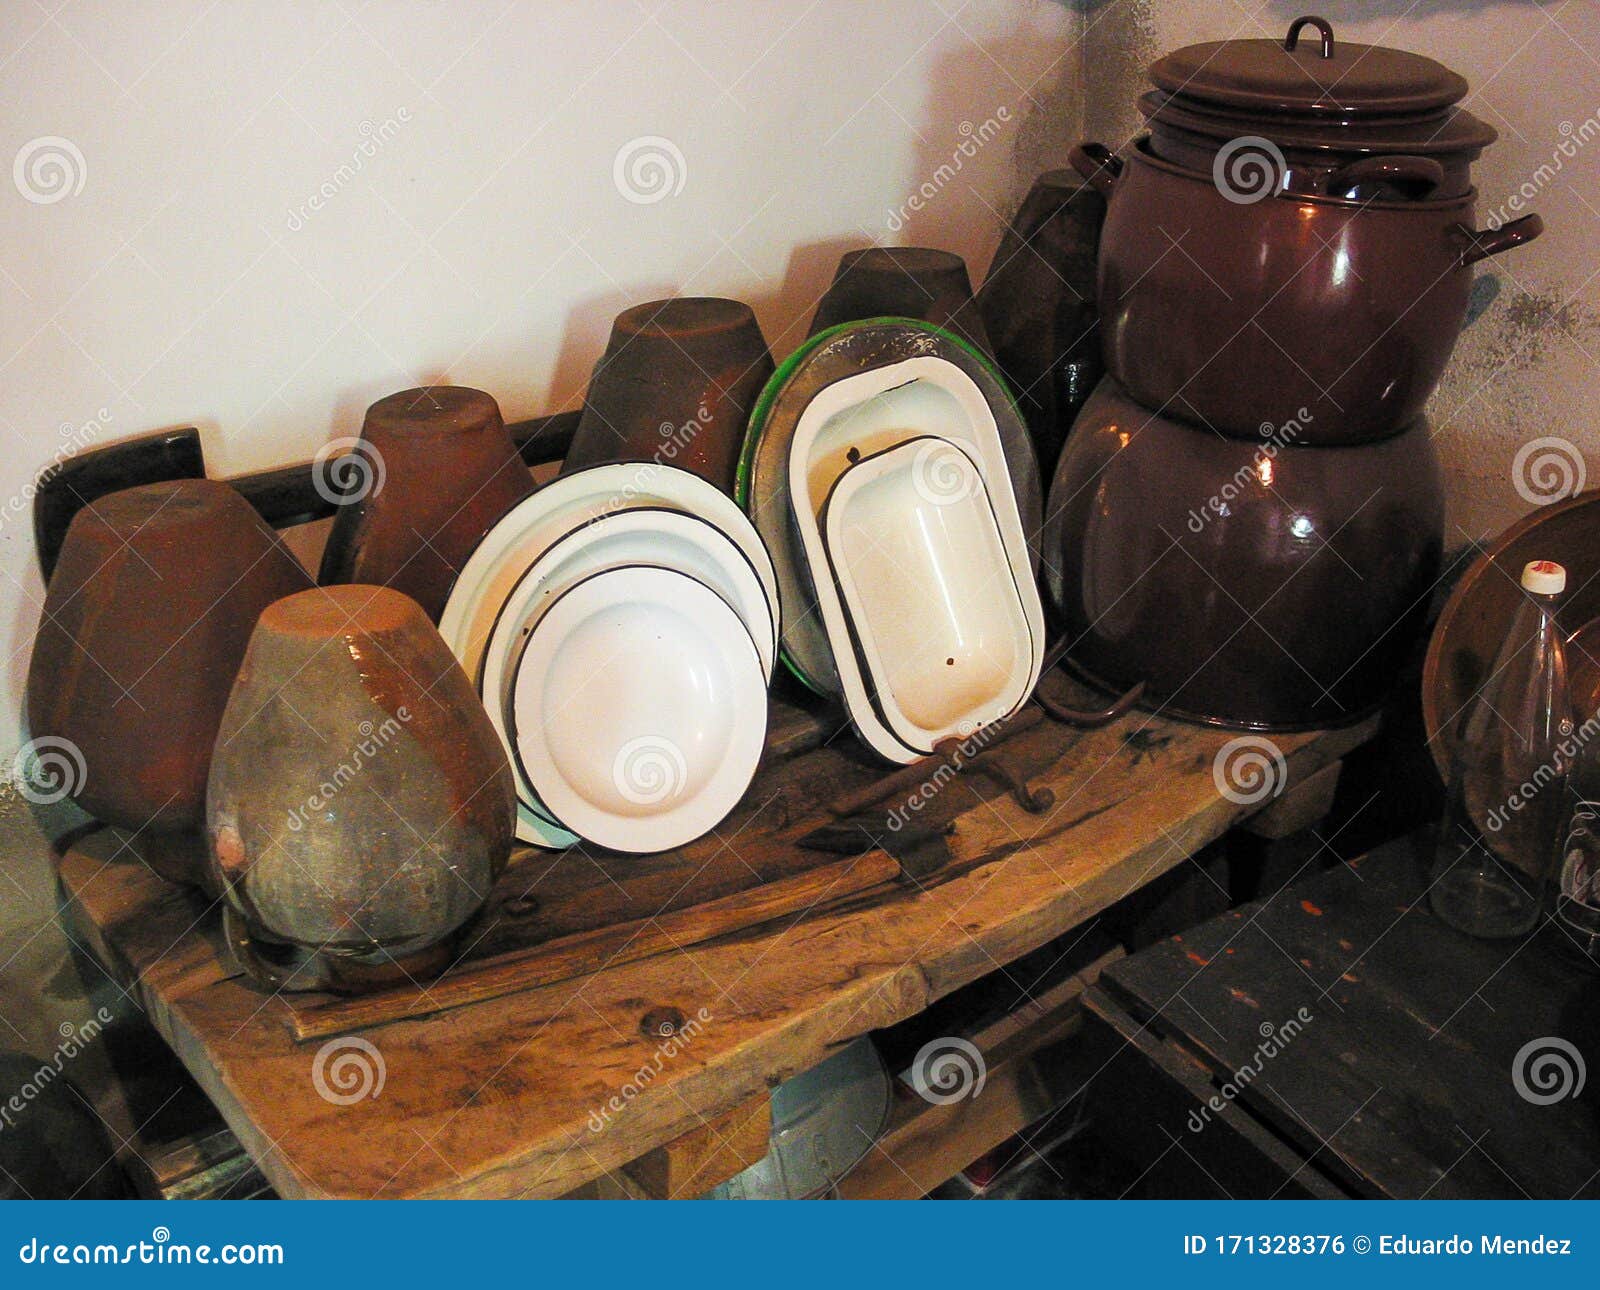 cupboard with pots